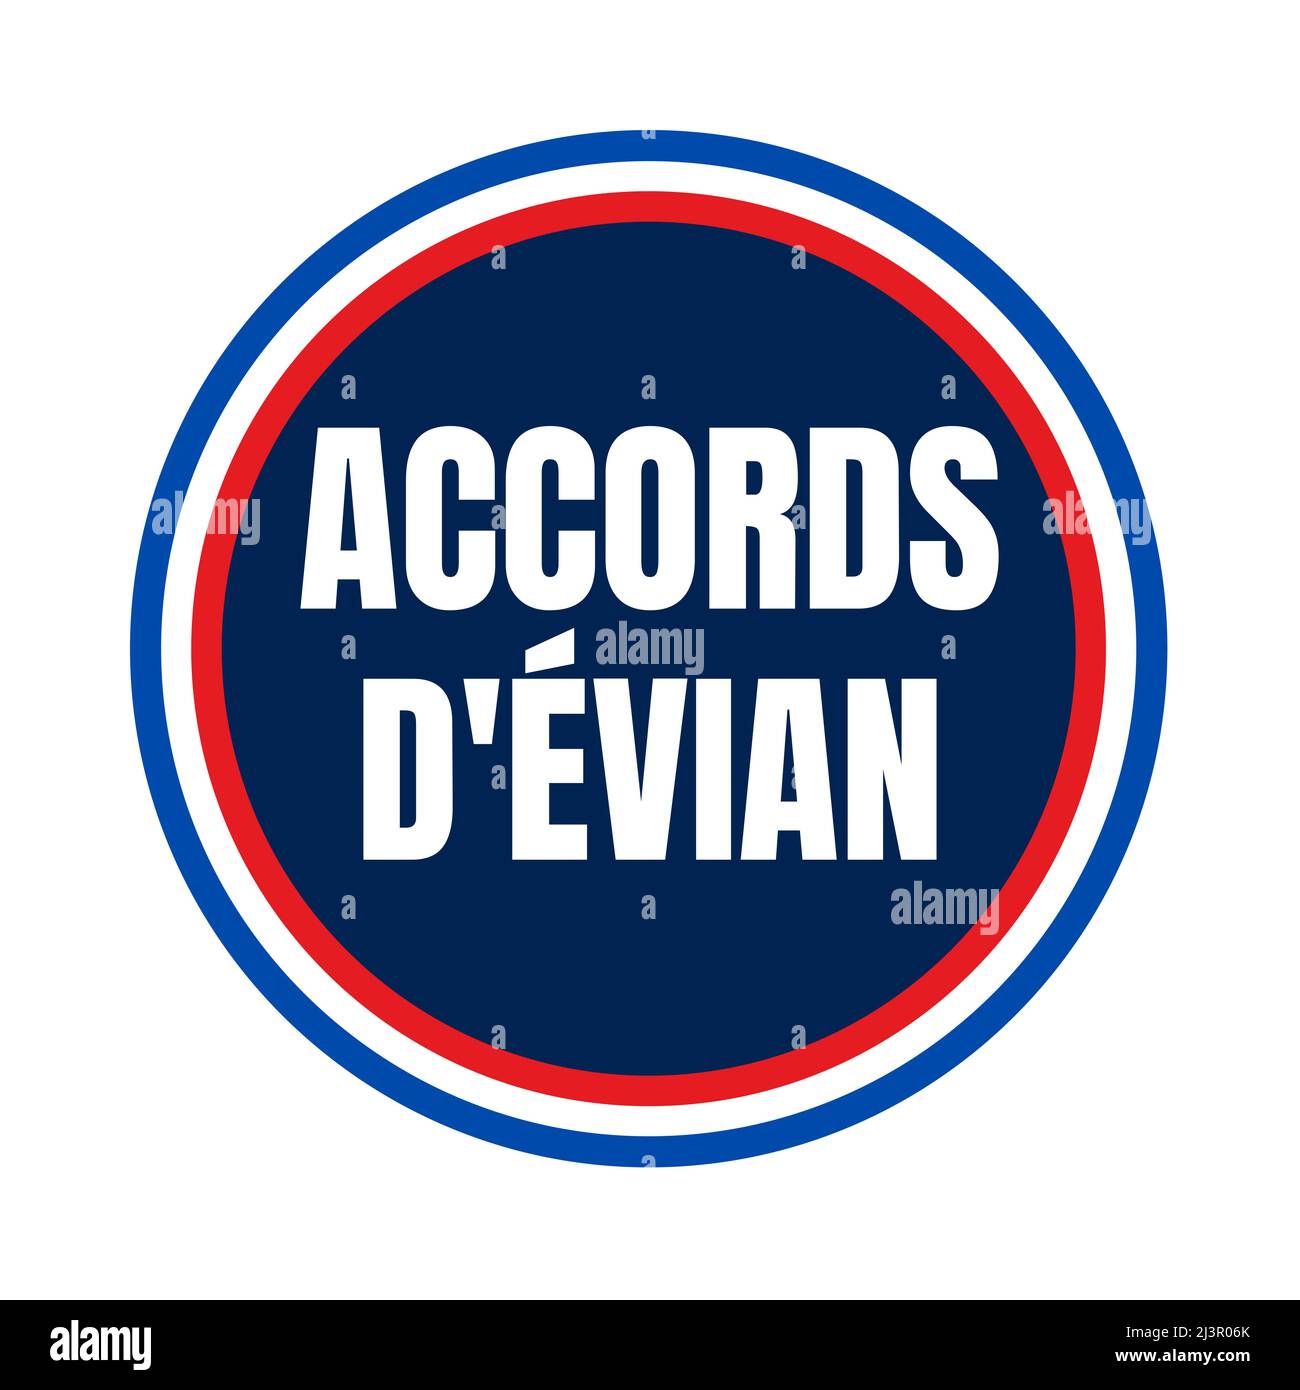 Evian accord symbol icon in France Stock Photo